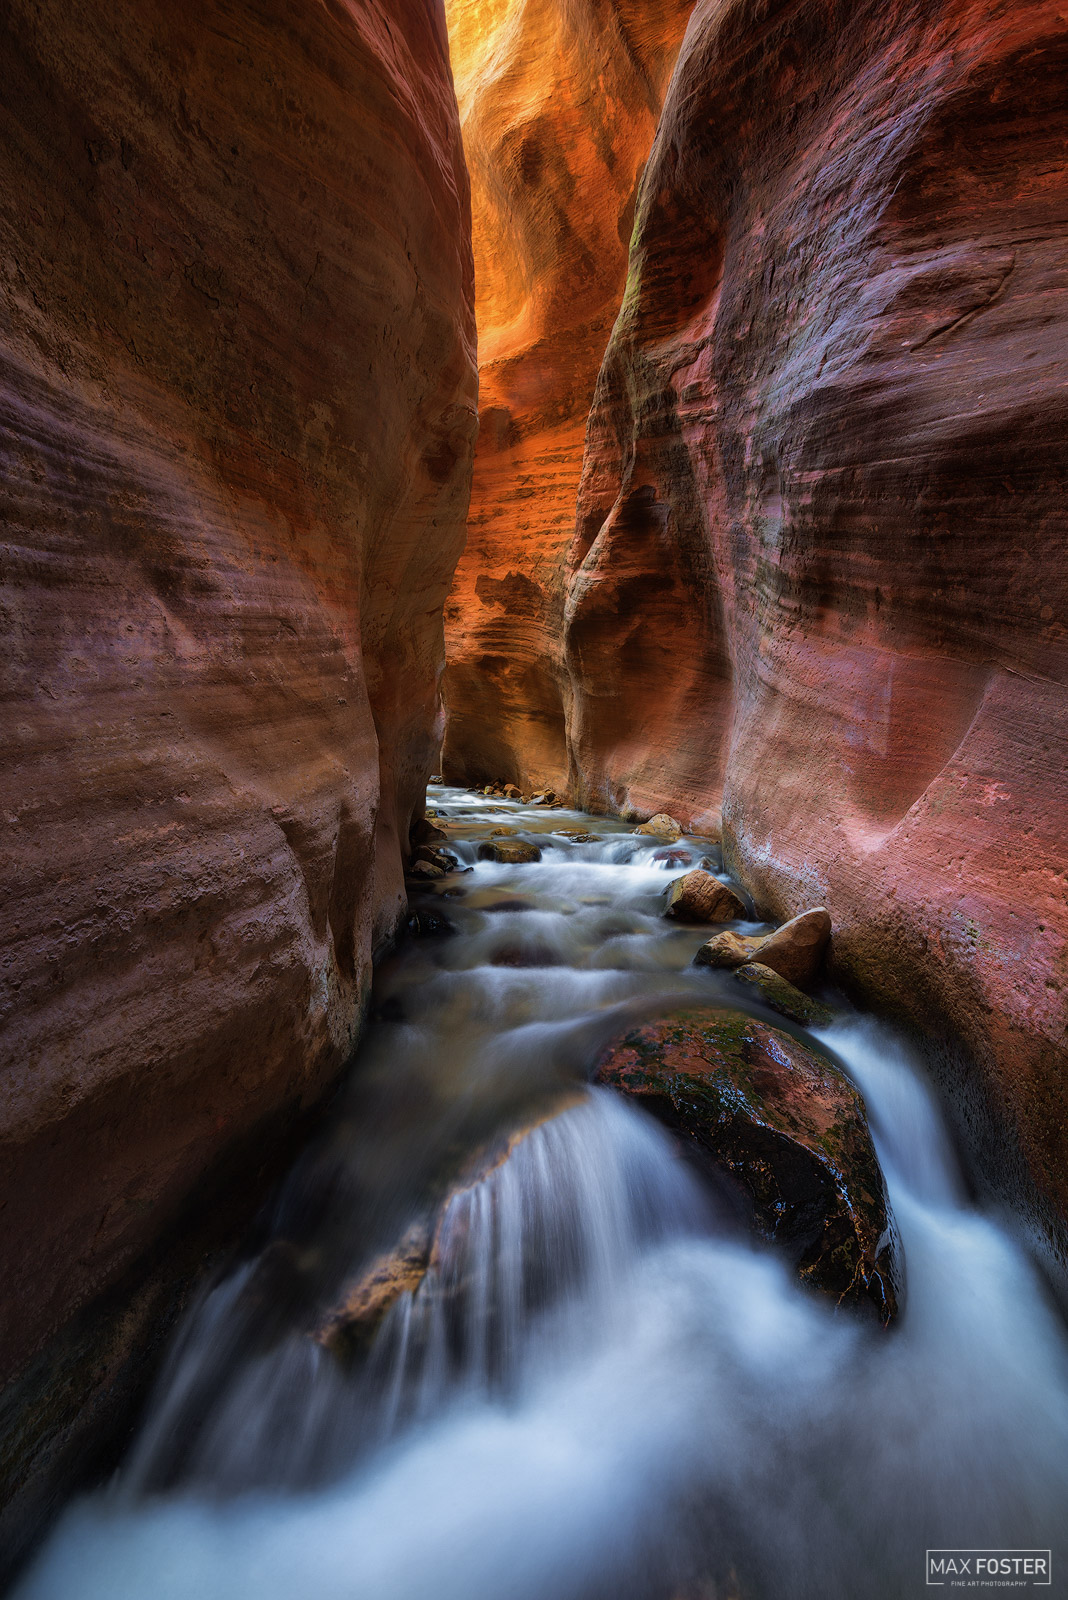 Bring your walls to life with Tranquil Flow, Max Foster's limited edition photography print of Kanarra Creek in Utah from his...